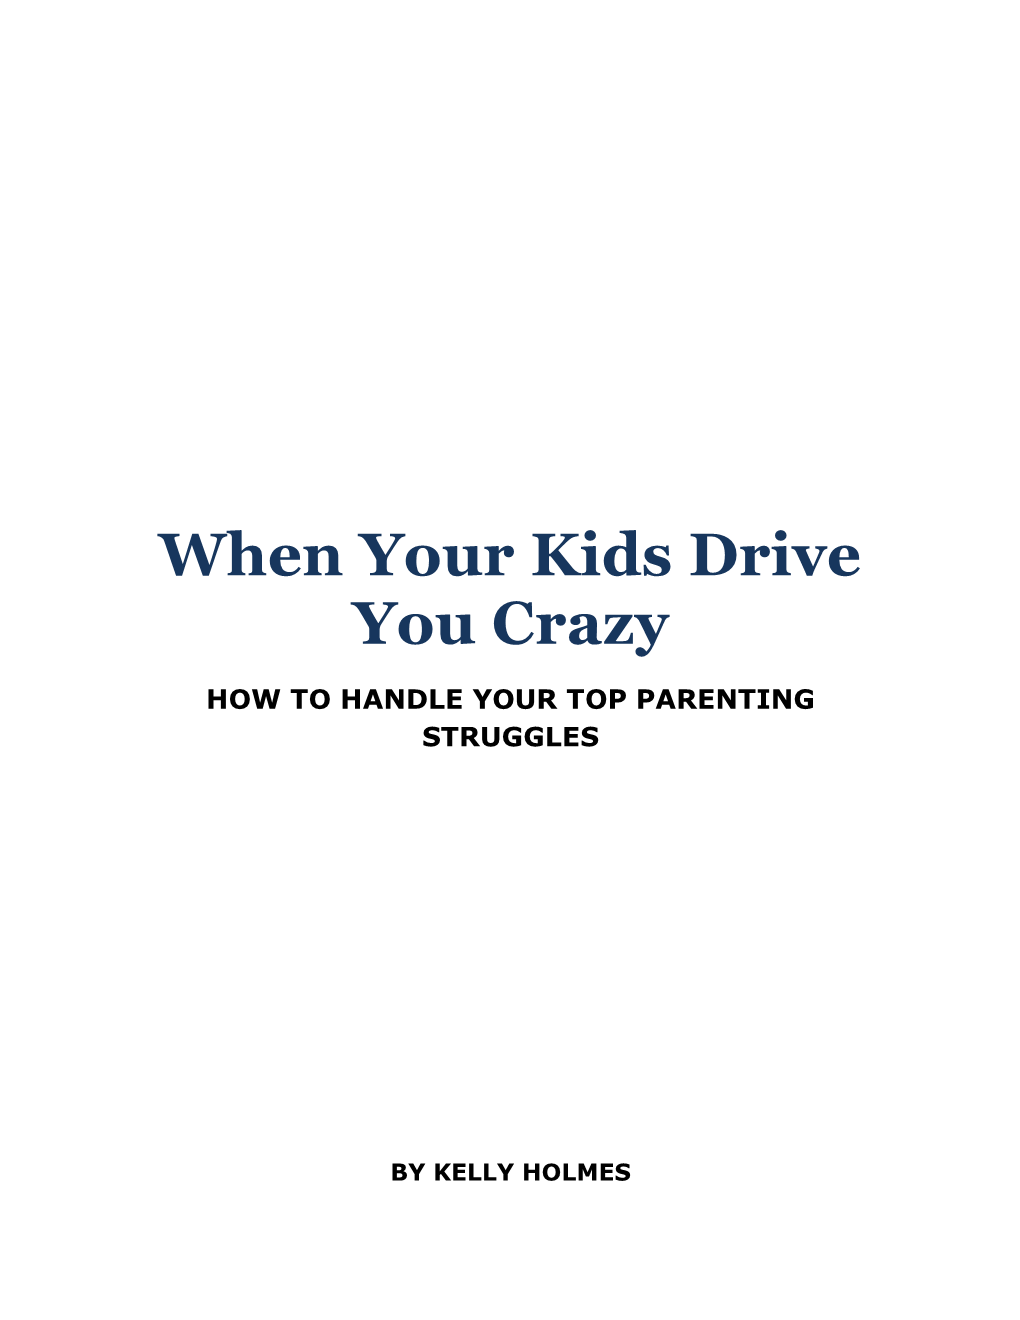 When Your Kids Drive You Crazy